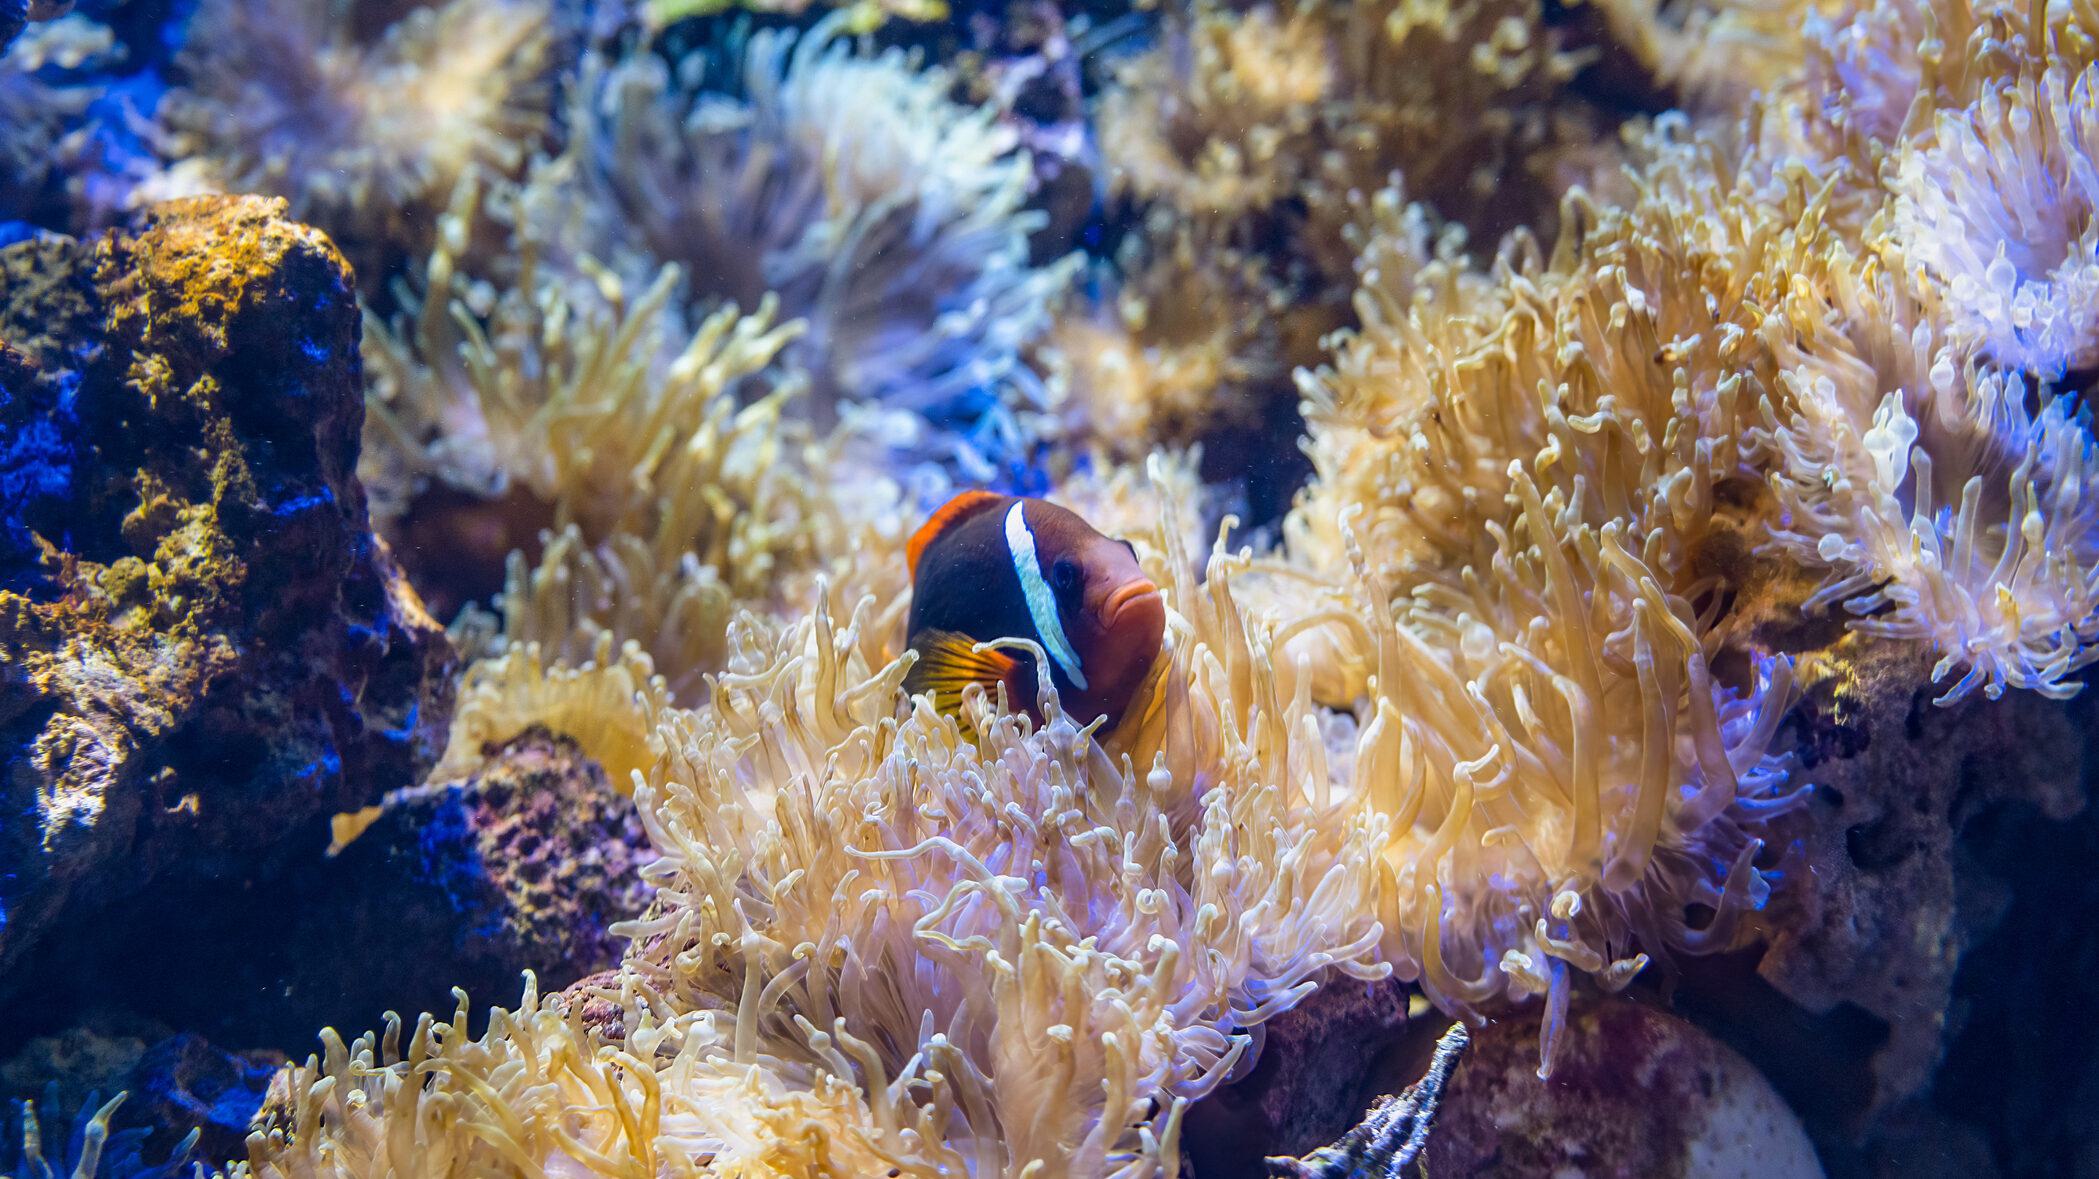 A tomato clownfish peers out from its home among corals on a reef.